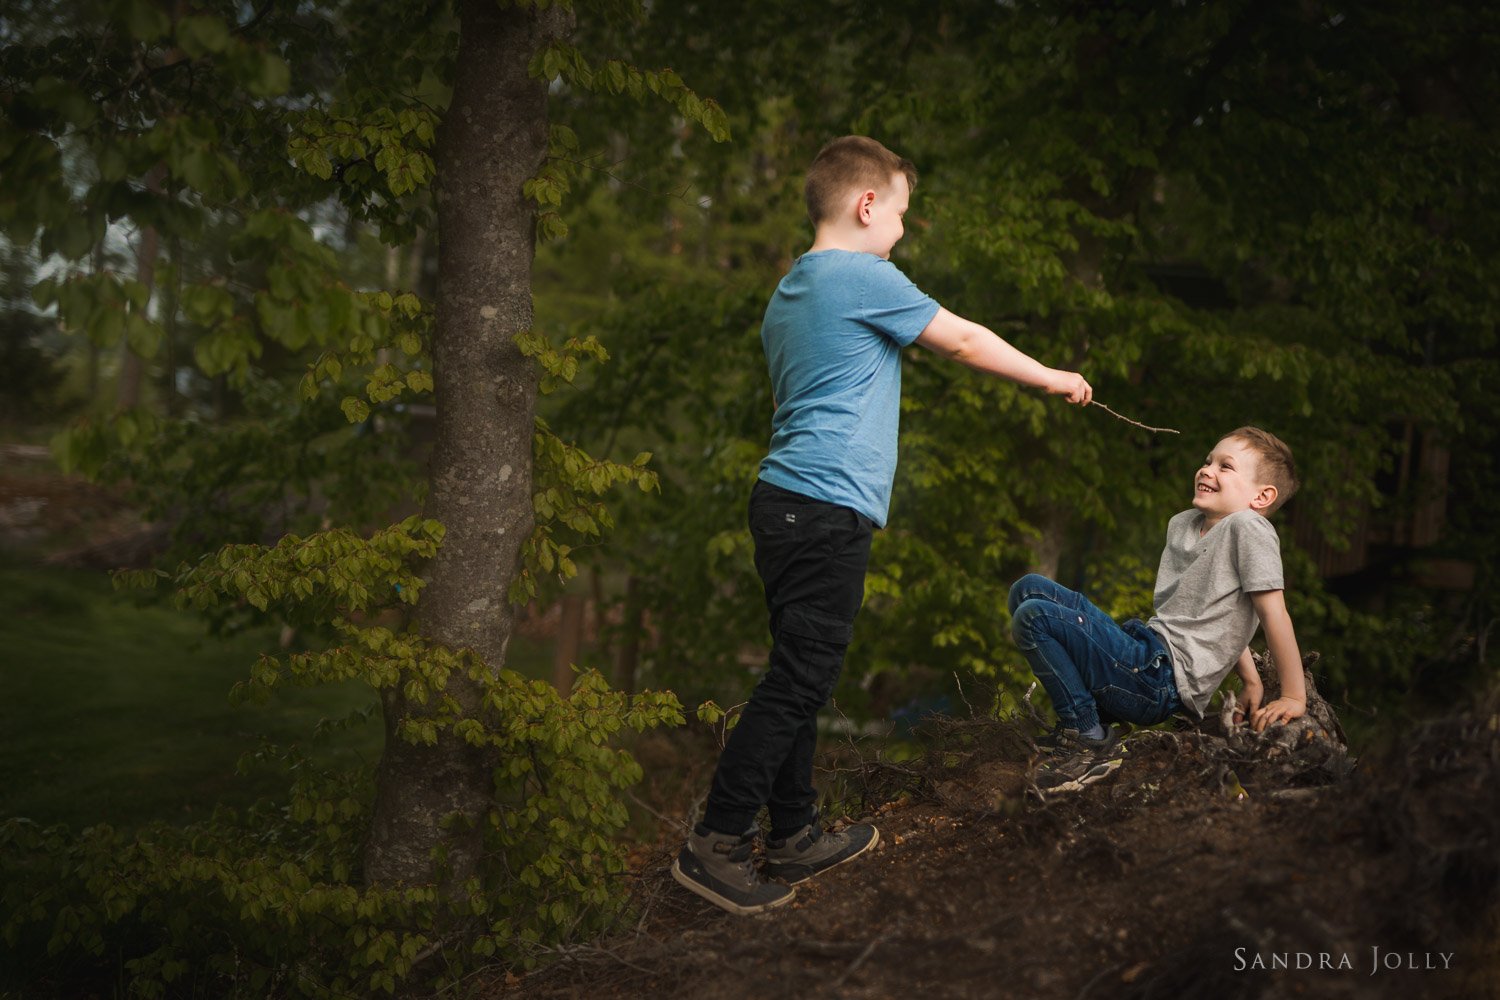 brothers-playing-in-garden-by-sandra-jolly-photography-stockholm-photographer.jpg